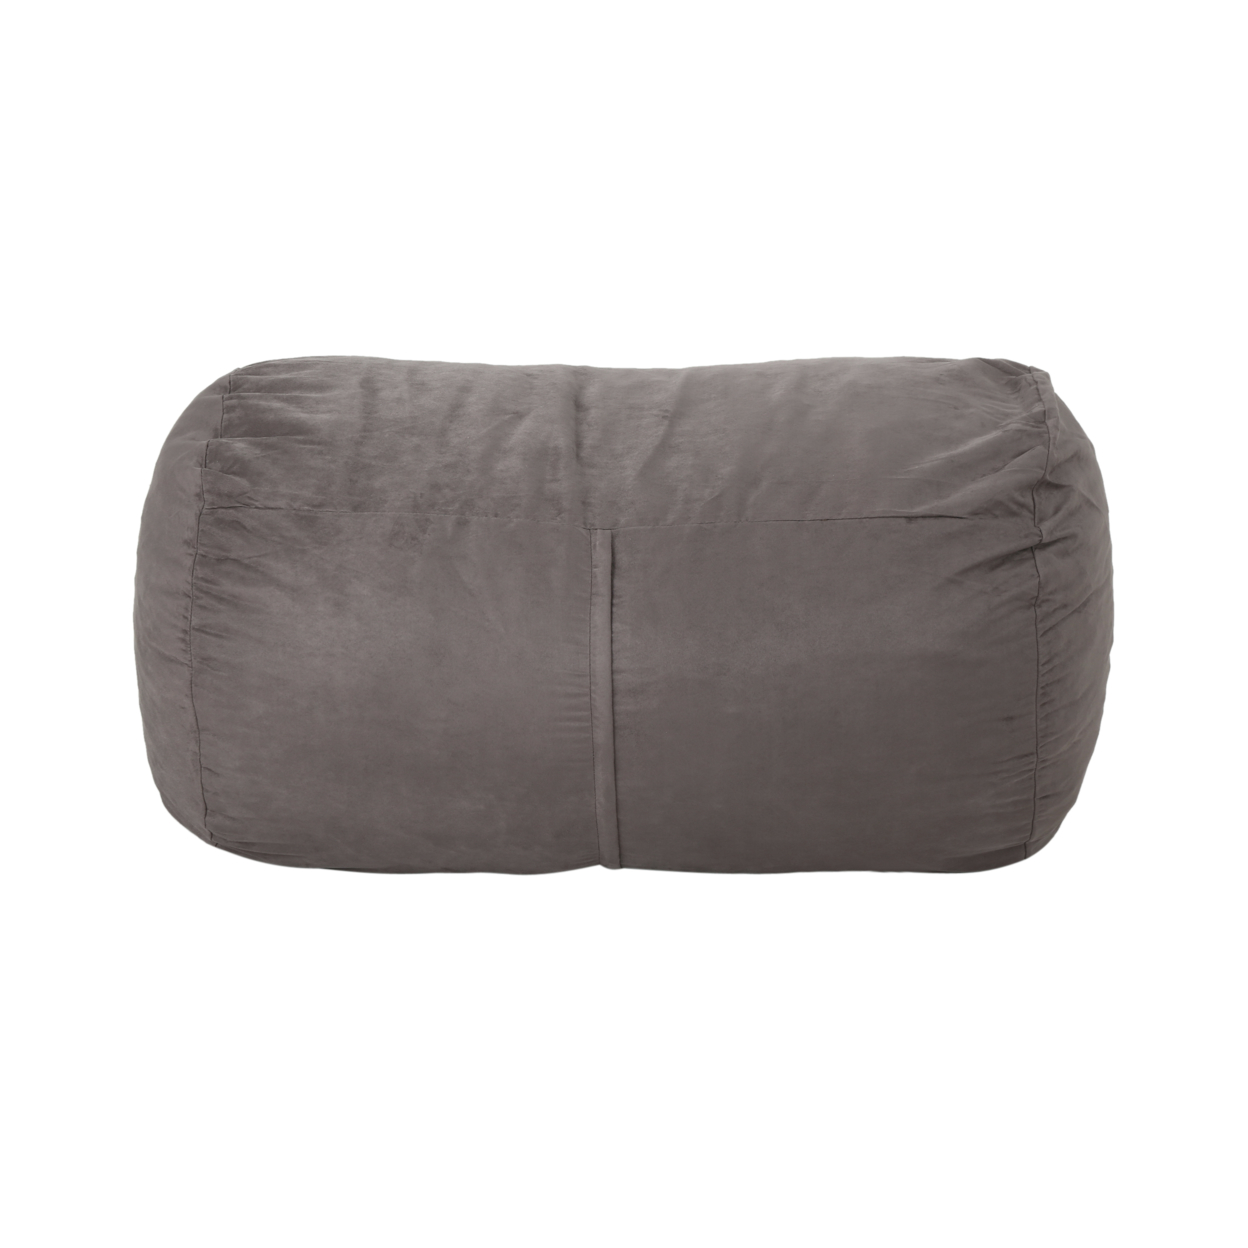 Genevieve Traditional 4 Foot Suede Bean Bag (Cover Only), Chinese Red - Charcoal